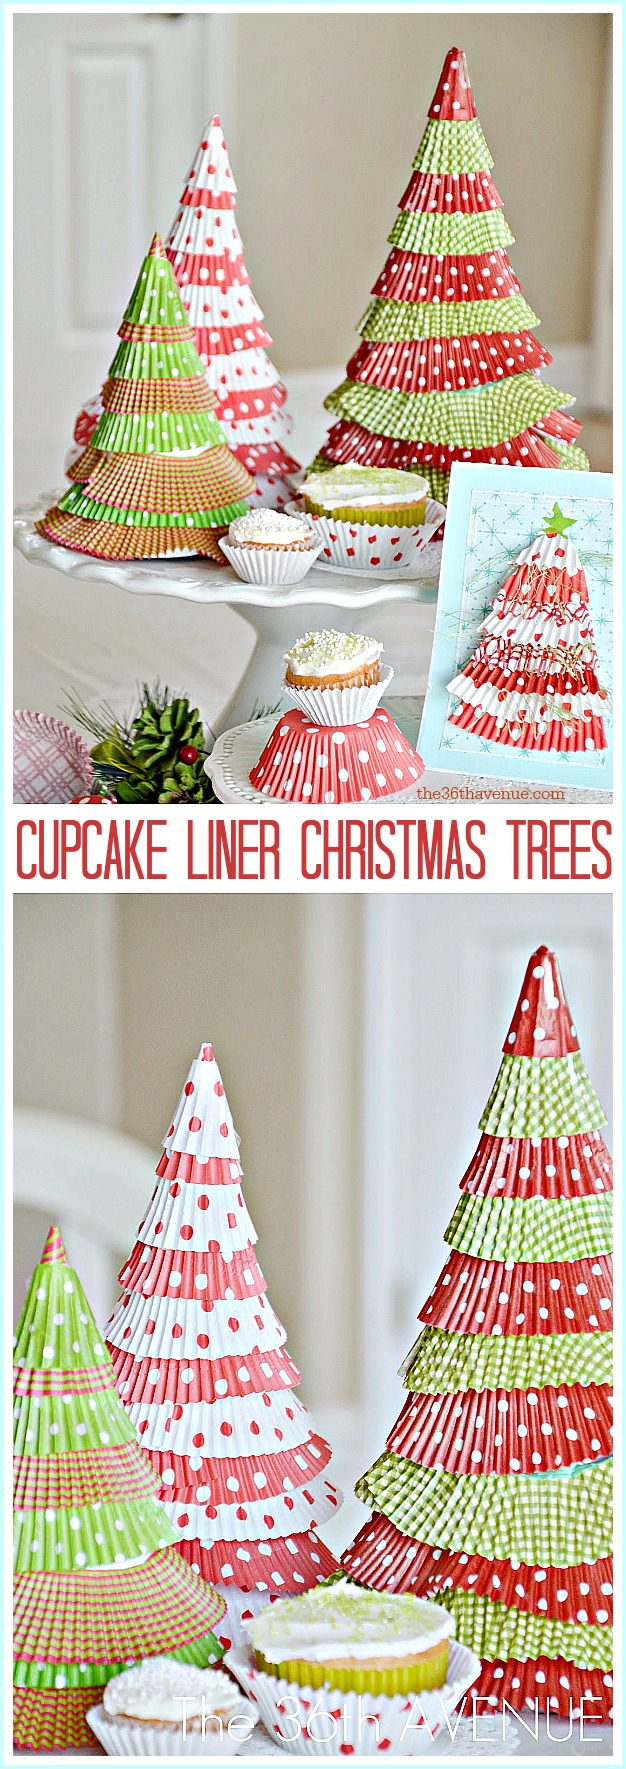 Christmas Crafts - Super cute and easy Christmas Tree Tutorial at the36thavenue.com